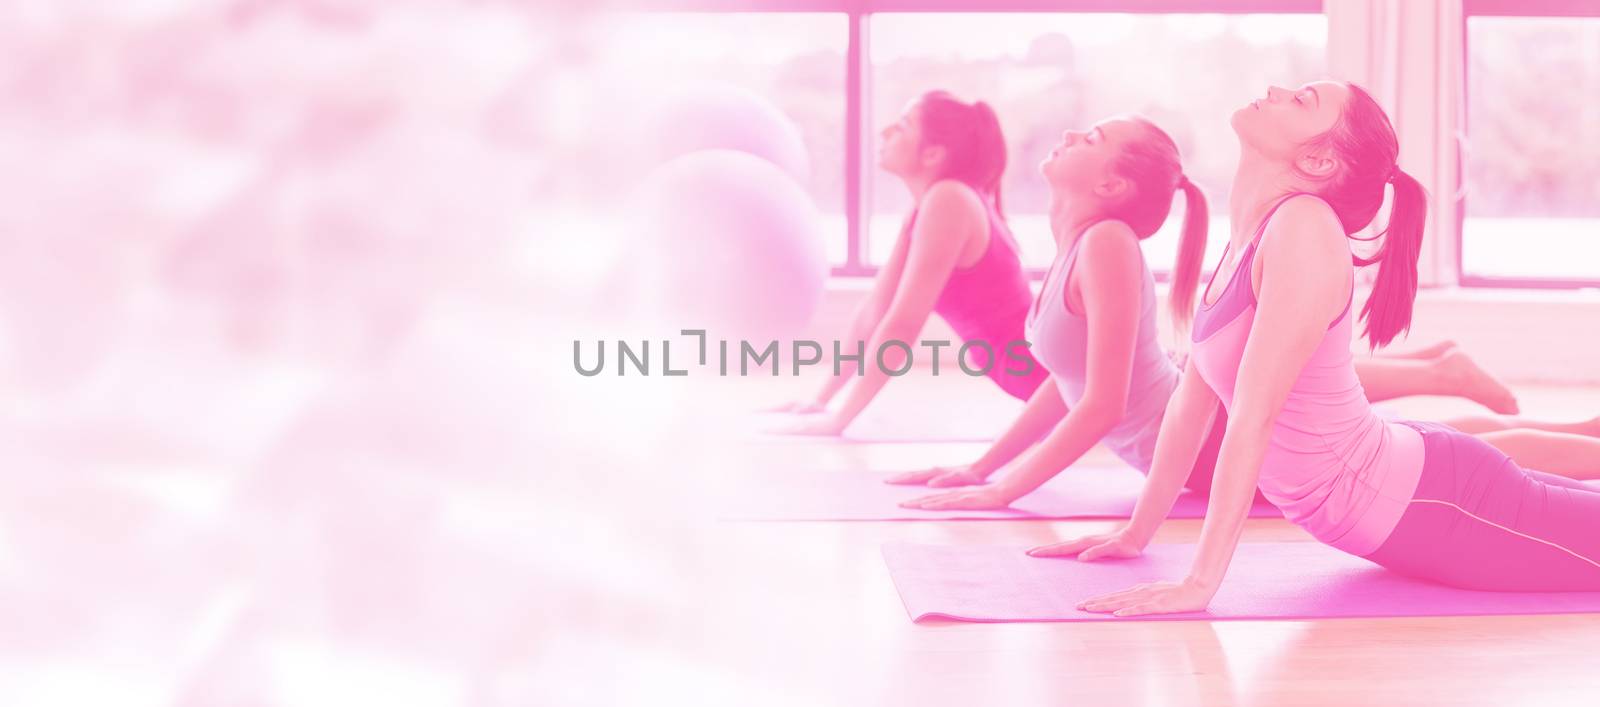 Glowing background against friends exercising on mats